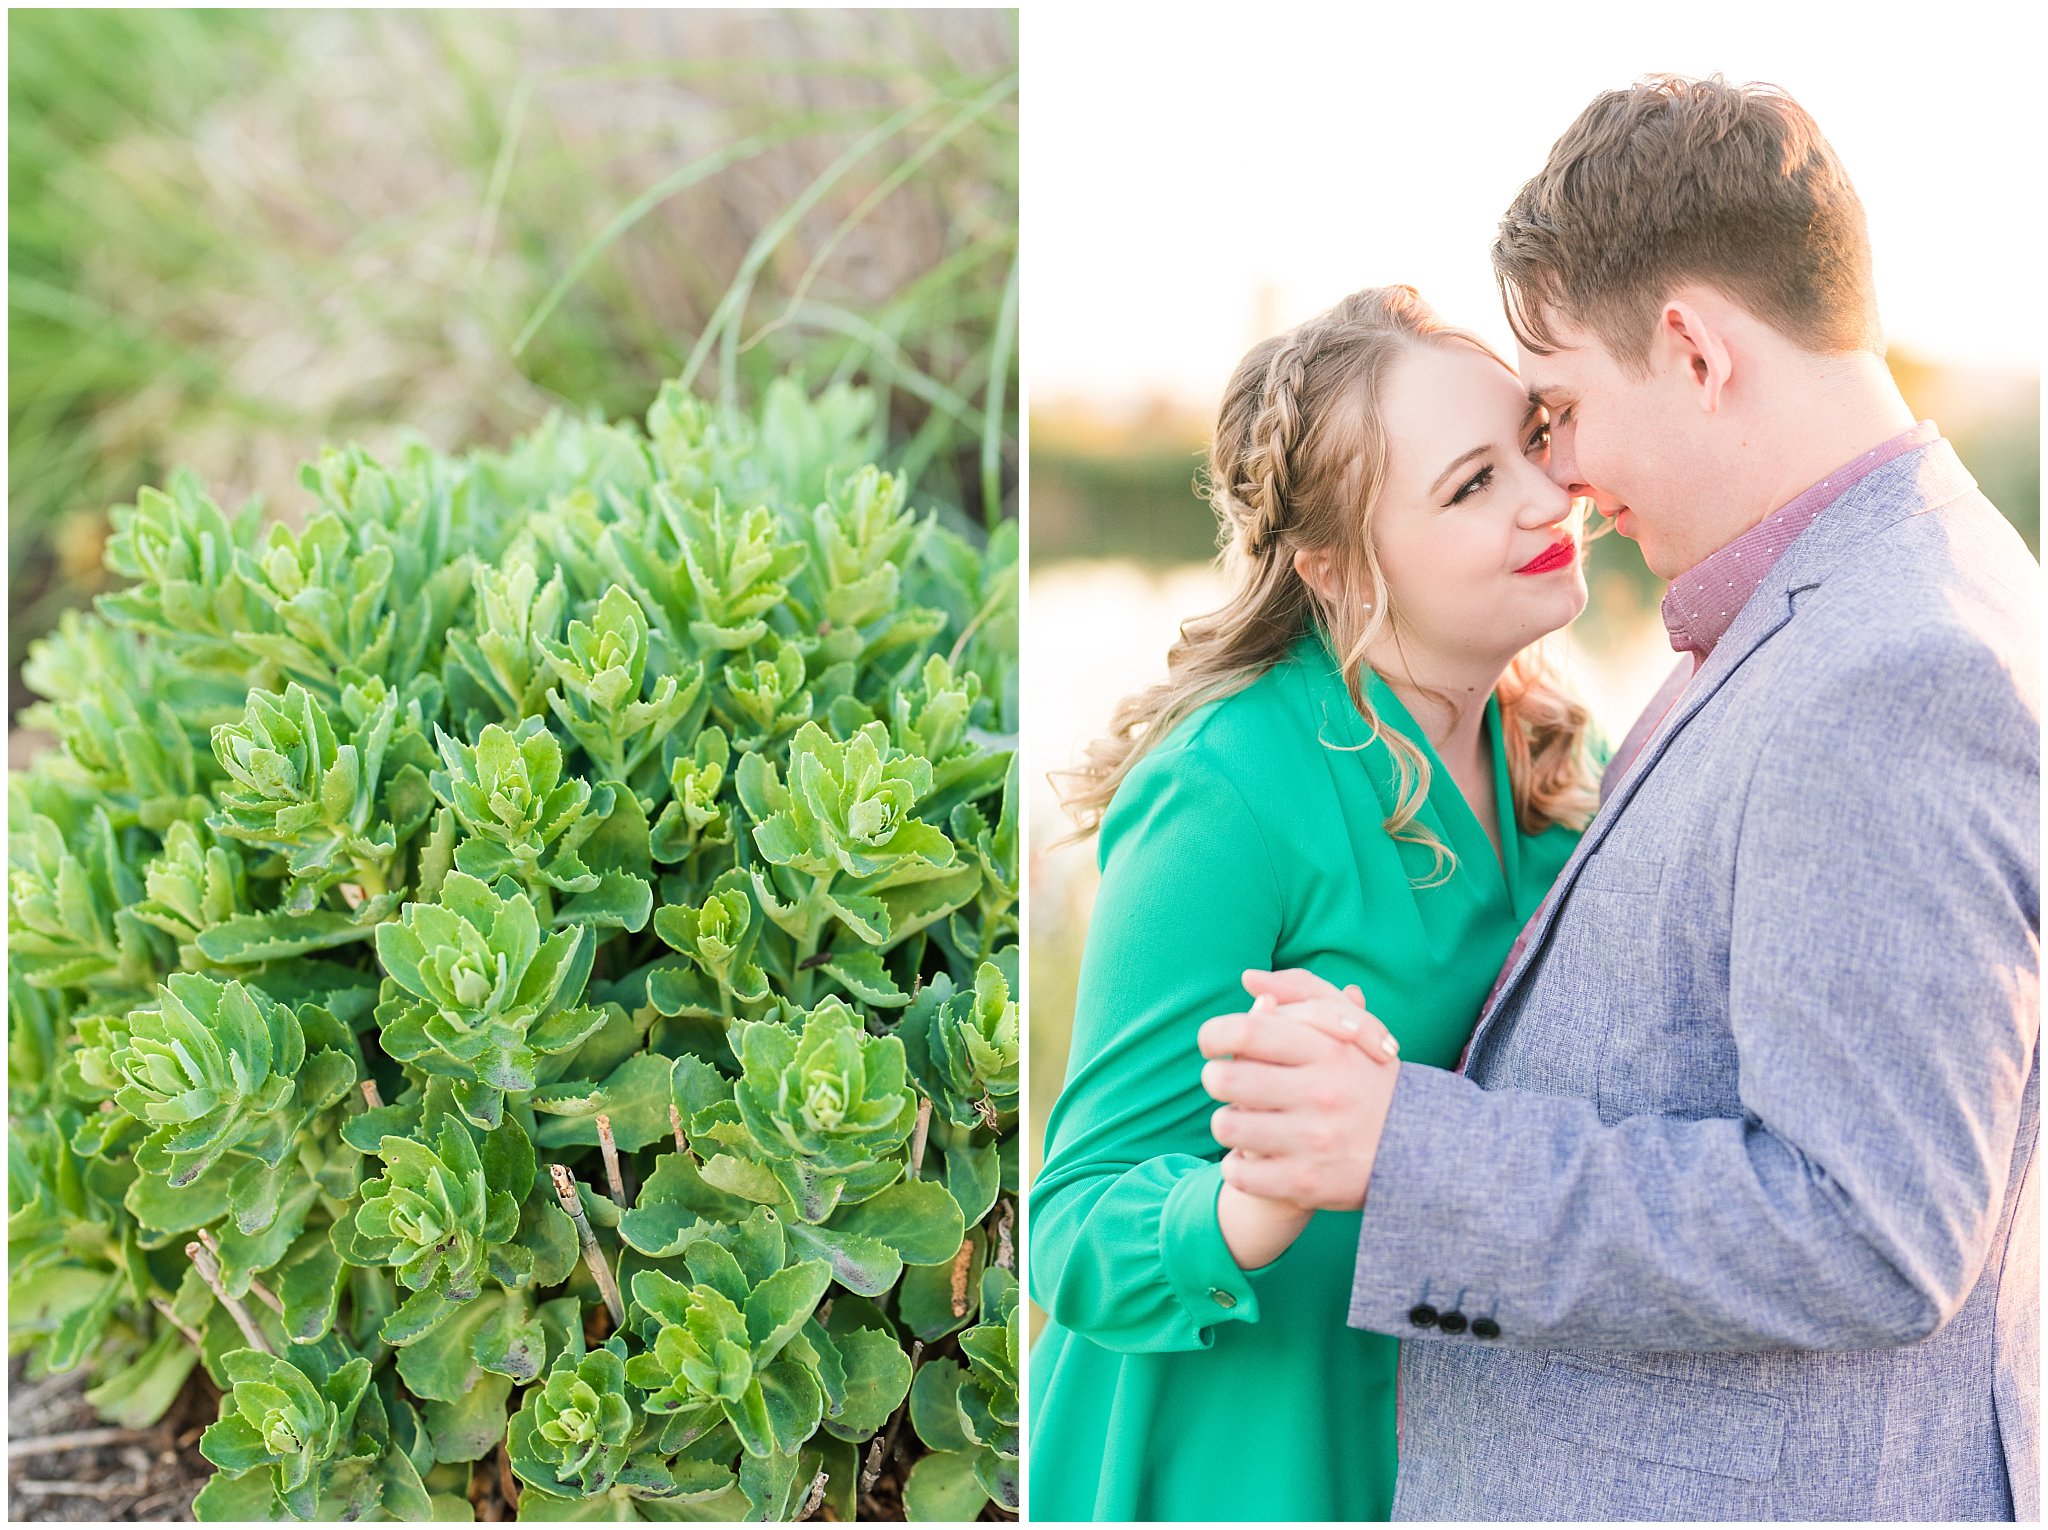 Couple in a garden for their engagement session with a vintage 1950s dress | Summer USU Botanical Garden Engagement Session | Jessie and Dallin Photography